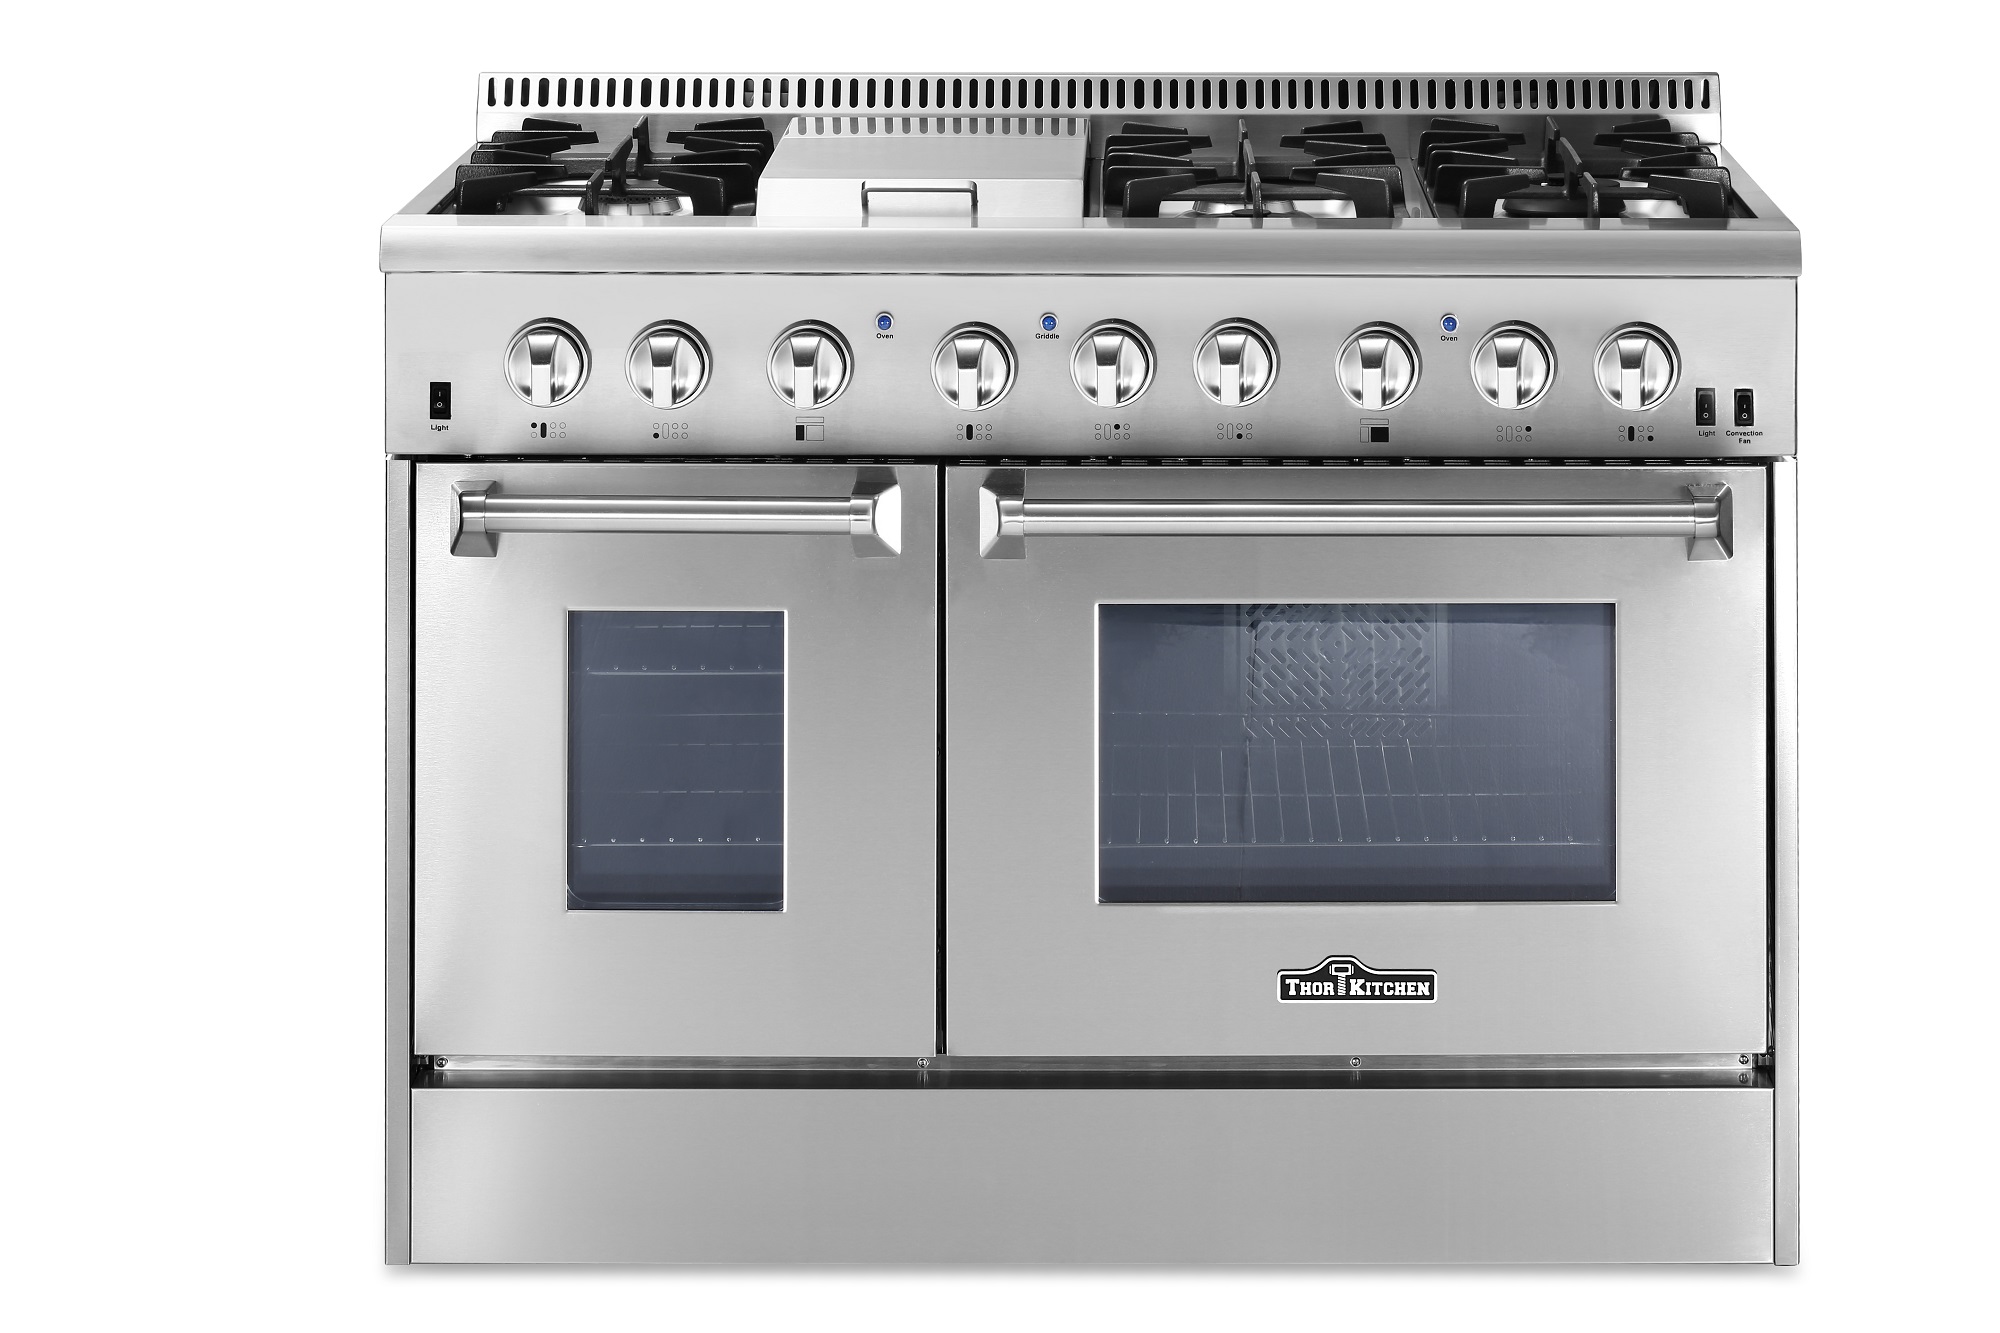 The new 48-inch Dual Fuel Range features heavy-duty continuous cast-iron cooking grates, a black porcelain drip pan on the cook top and high-end infrared broiler.